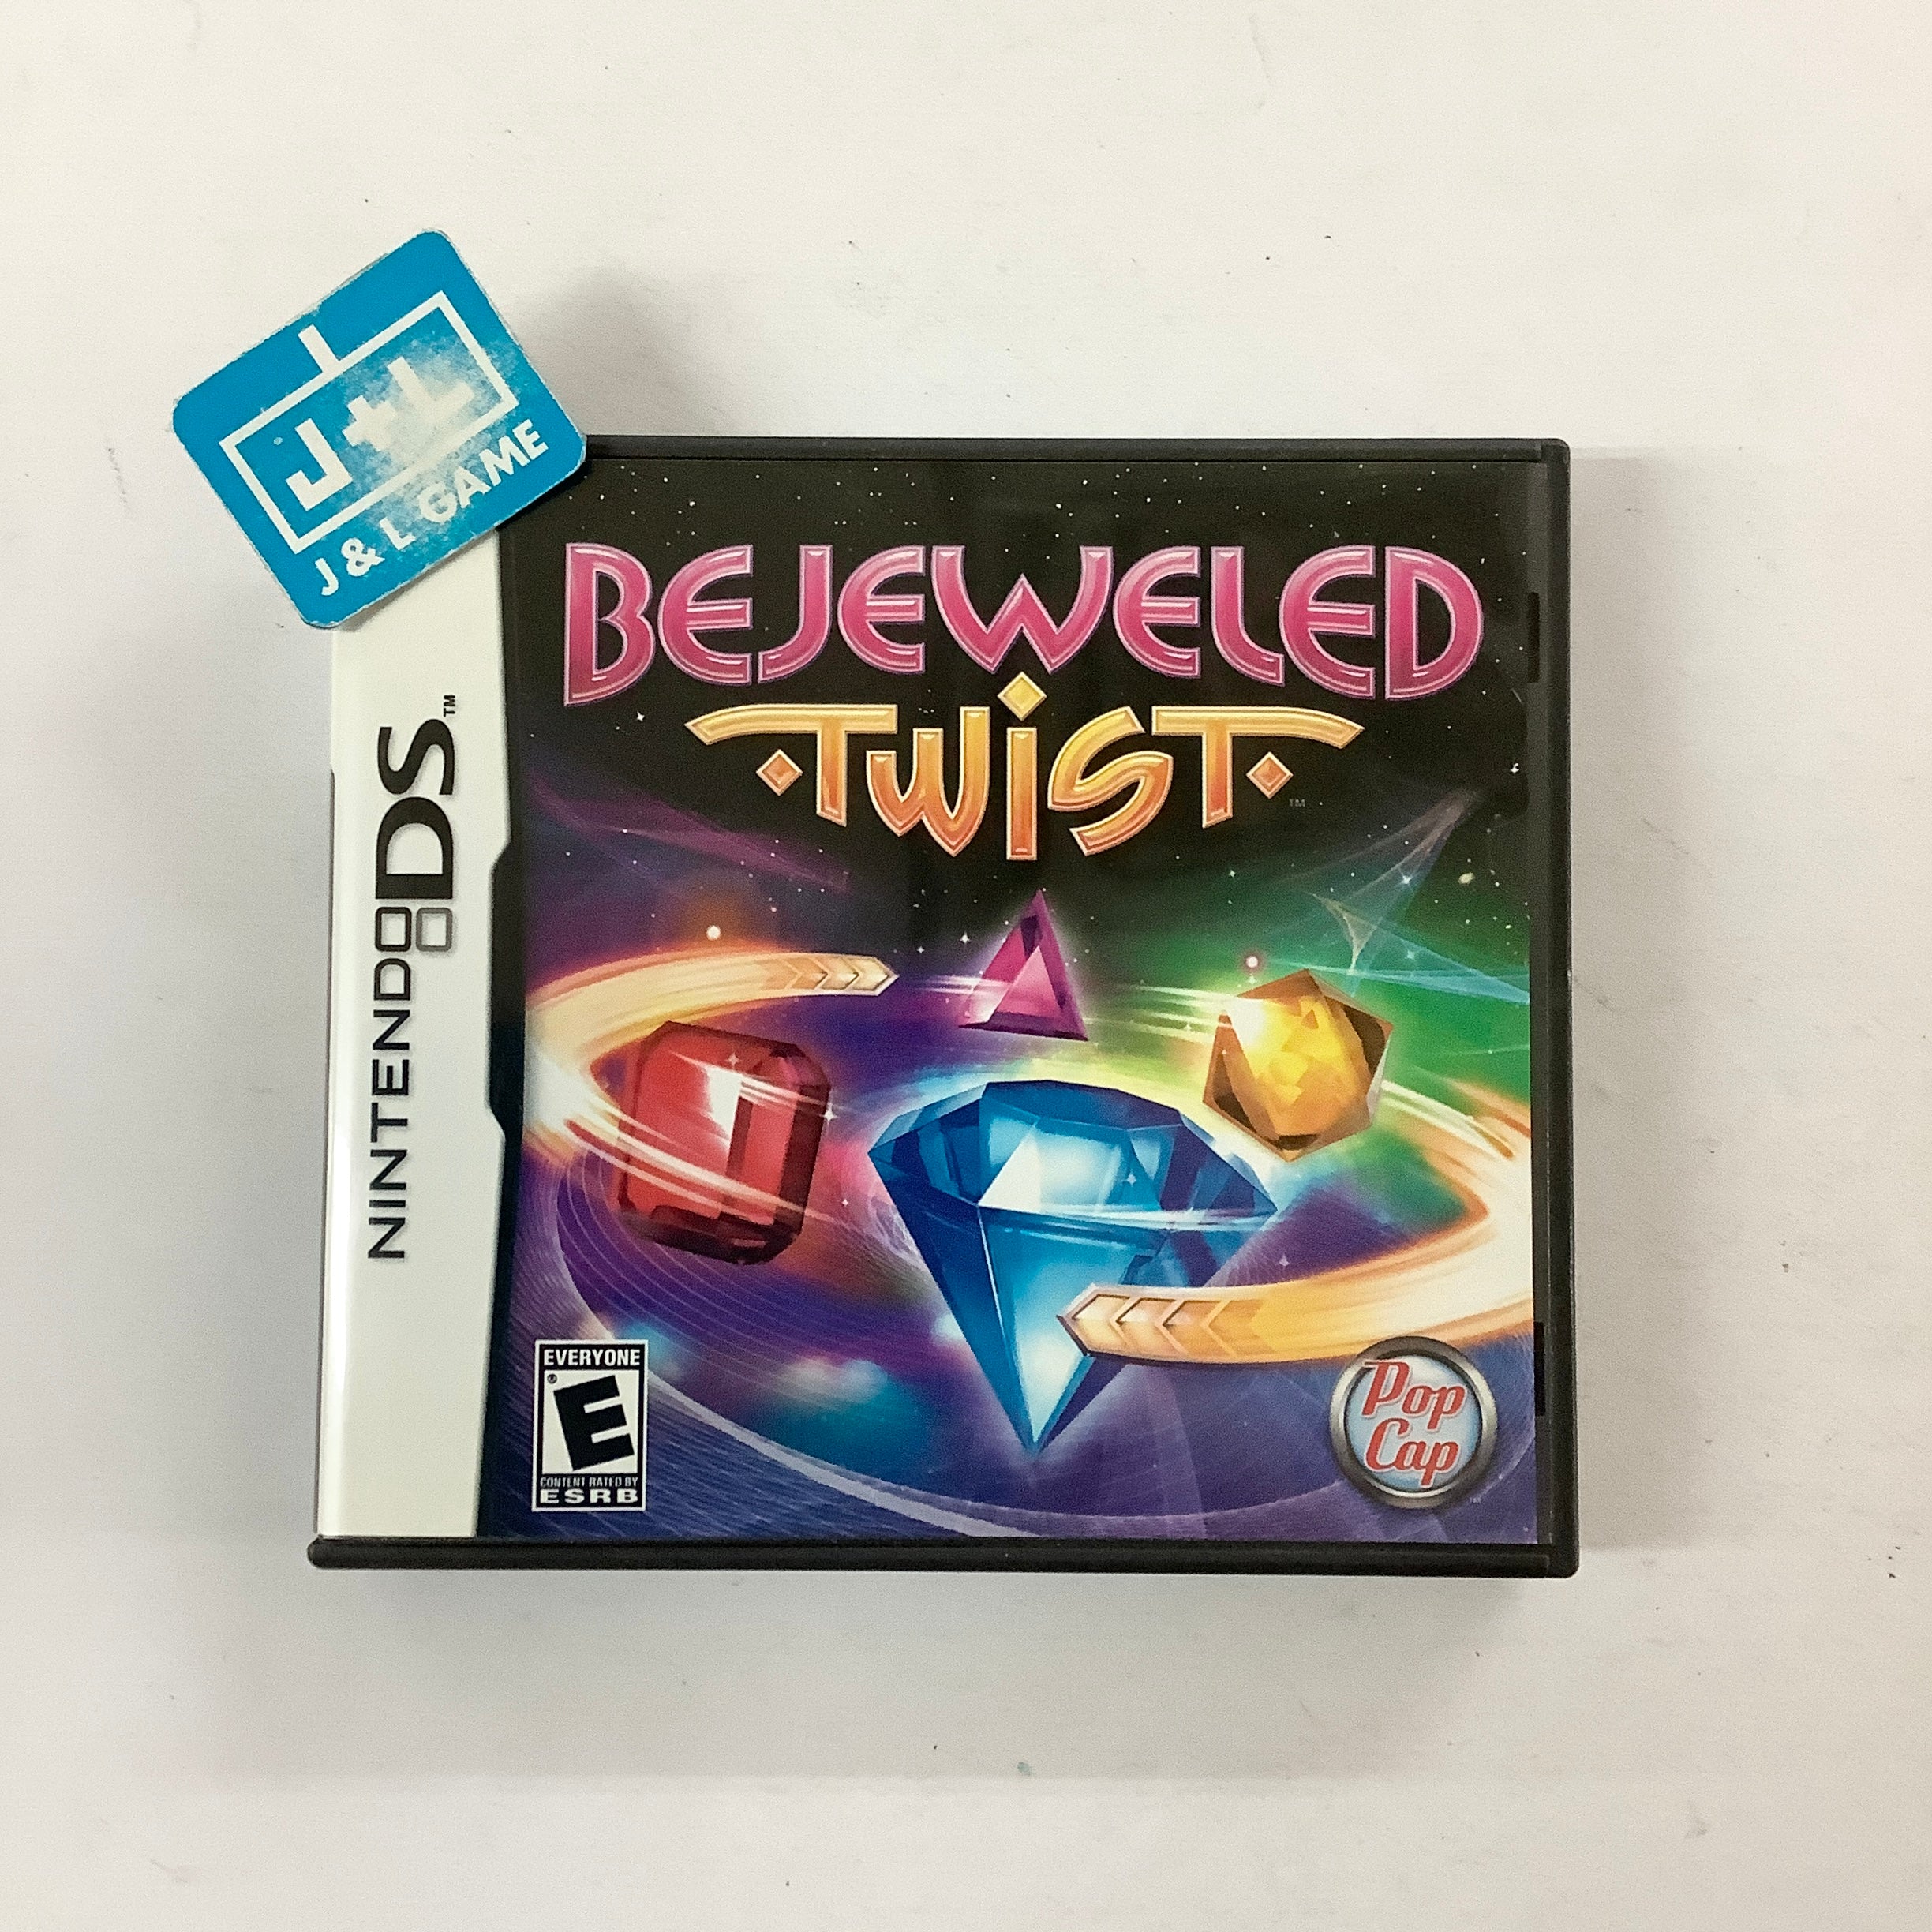 Bejeweled Twist -  (NDS) Nintendo DS [Pre-Owned] Video Games Pop Cap - PC Games   